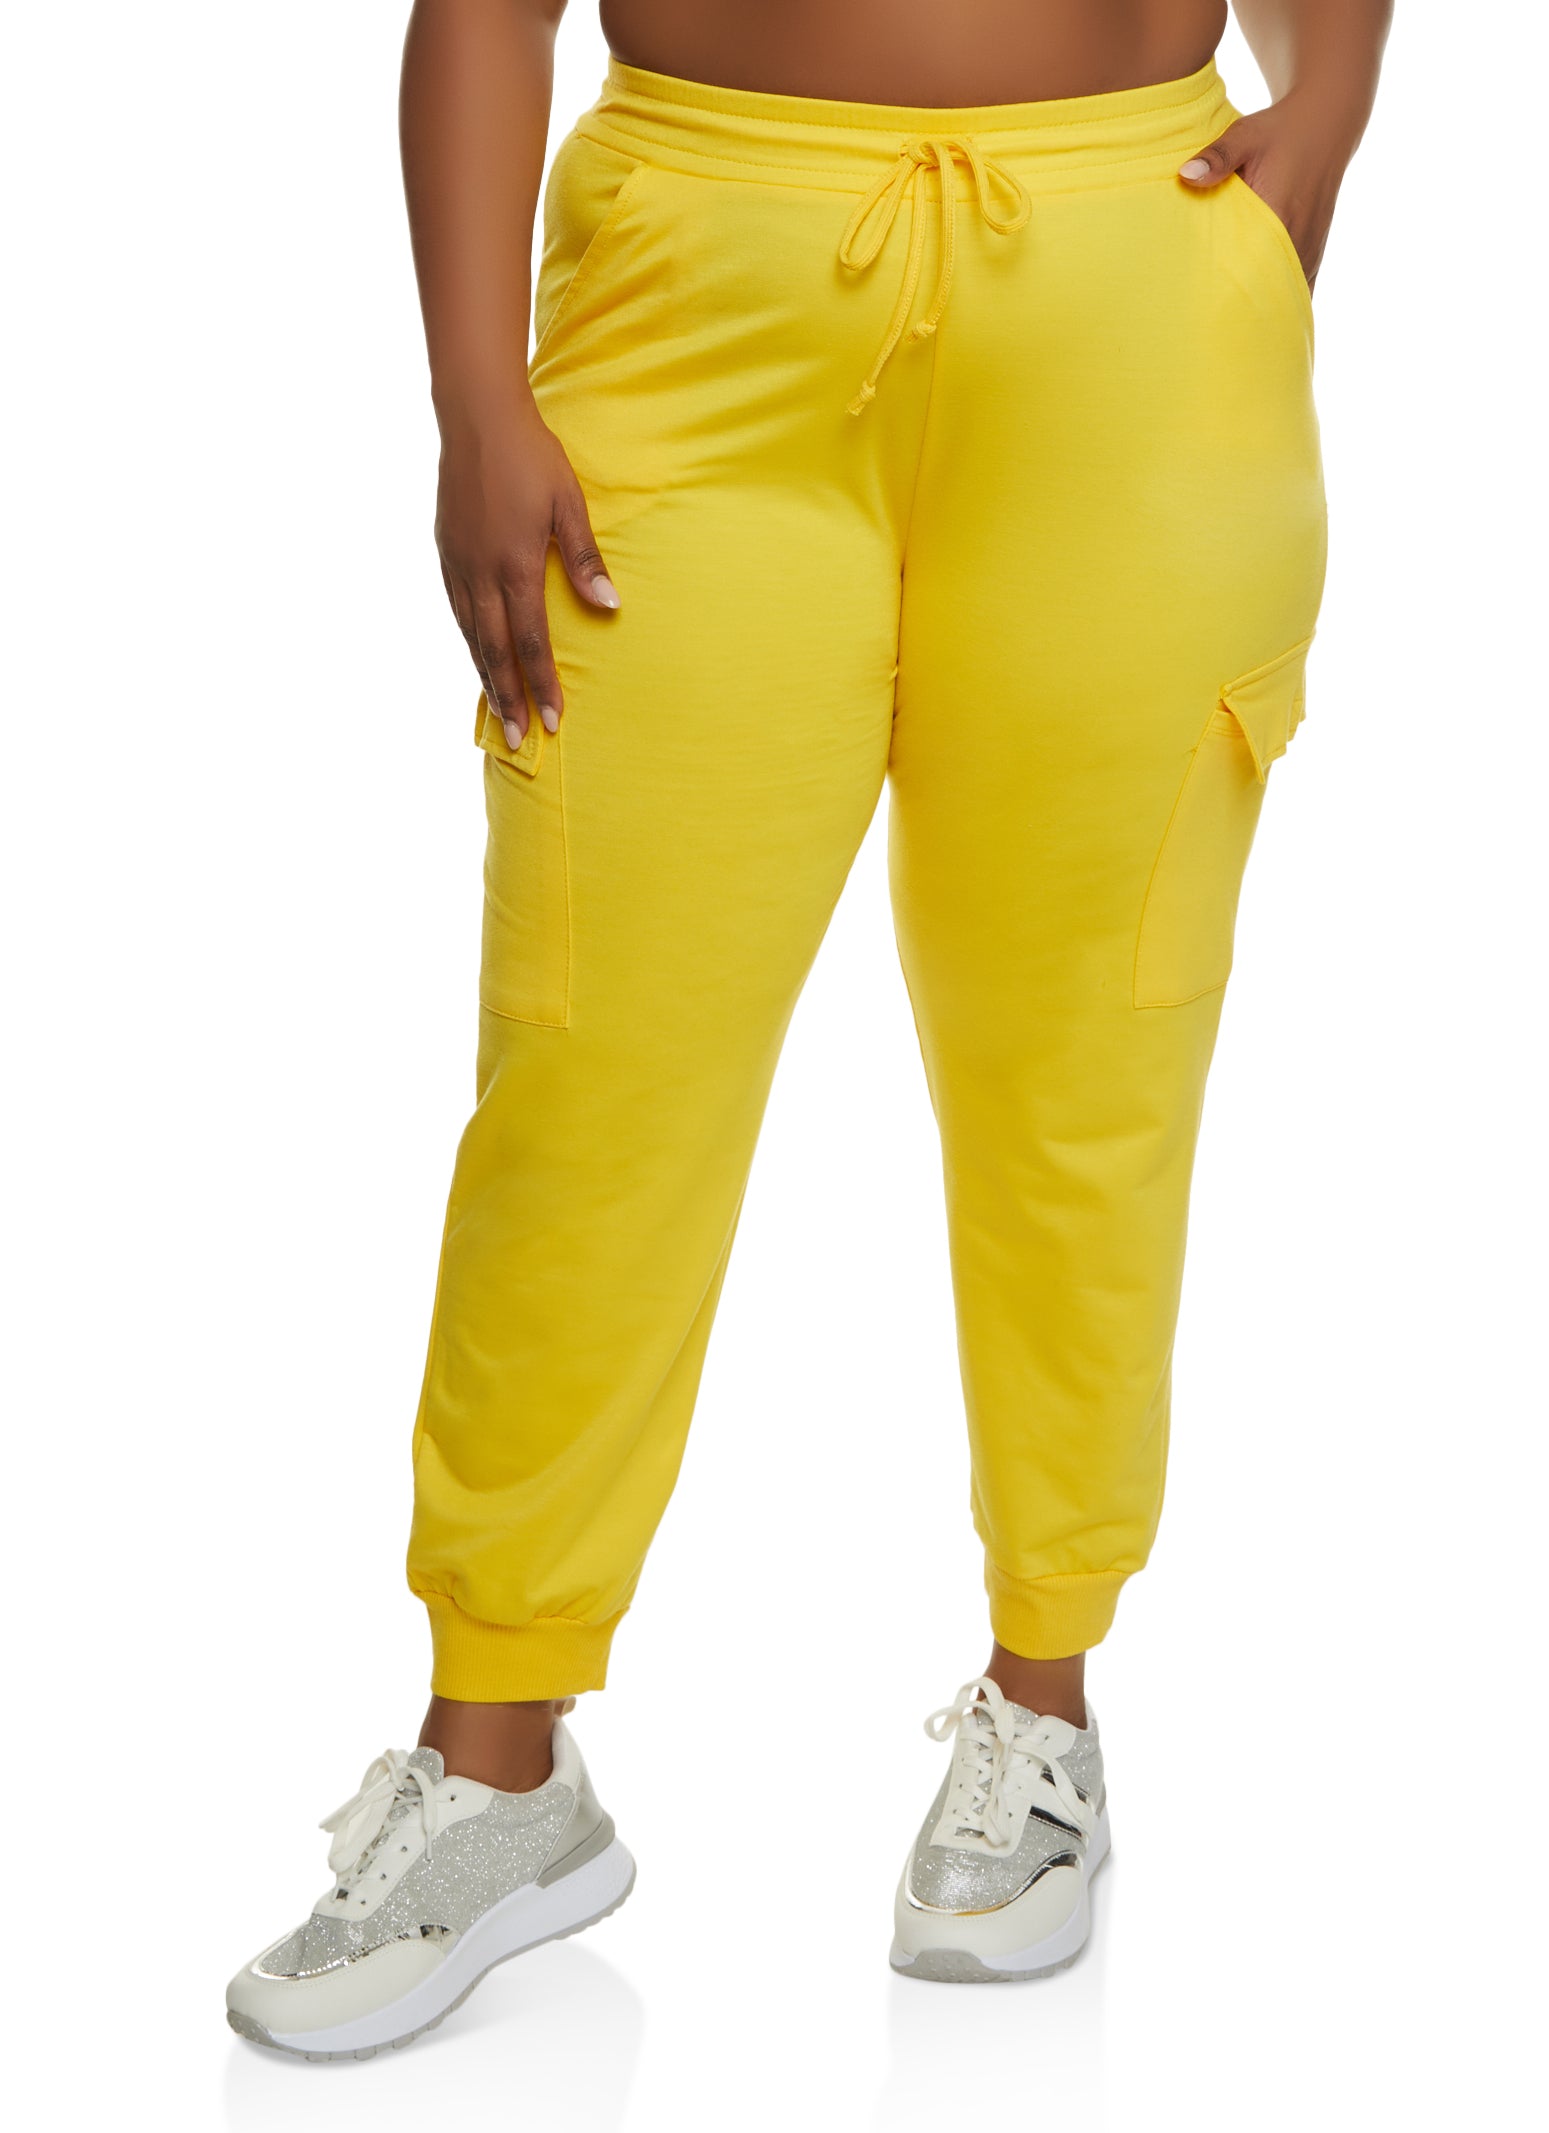 Rainbow Shops Womens Plus Size French Terry High Waist Joggers, Yellow, Size  3X